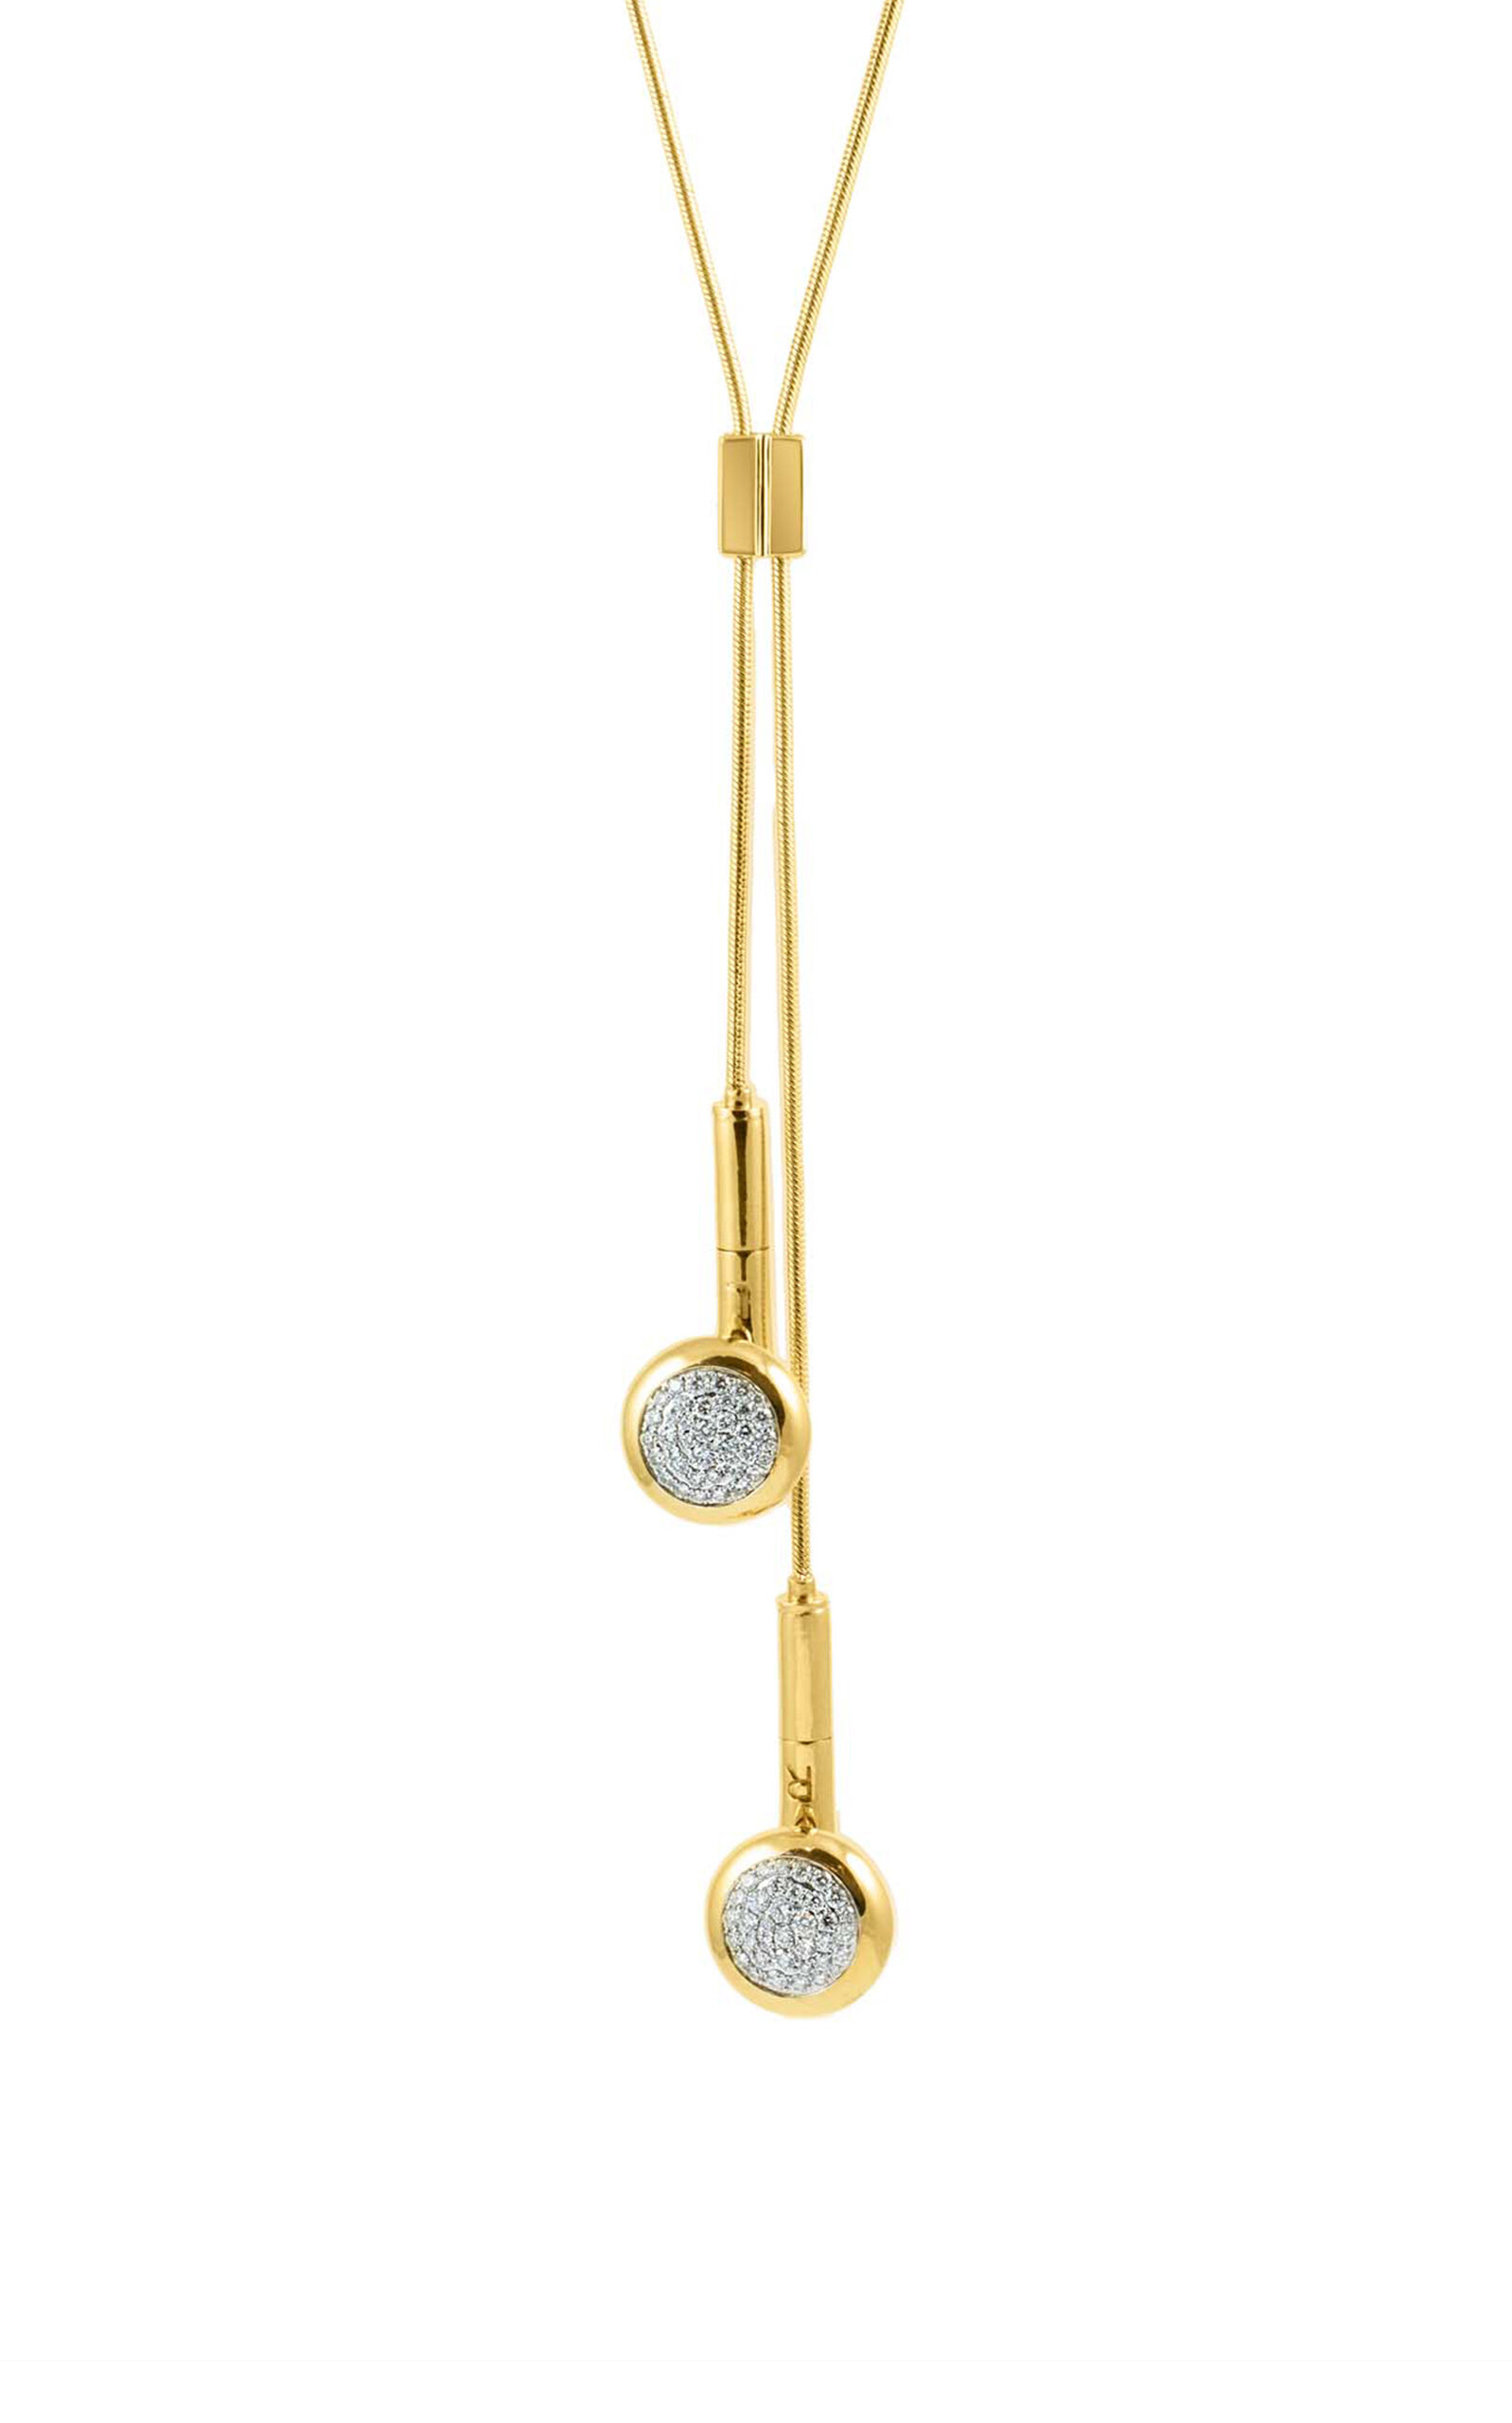 18k Yellow Gold Headphone Bolo Necklace with Diamonds